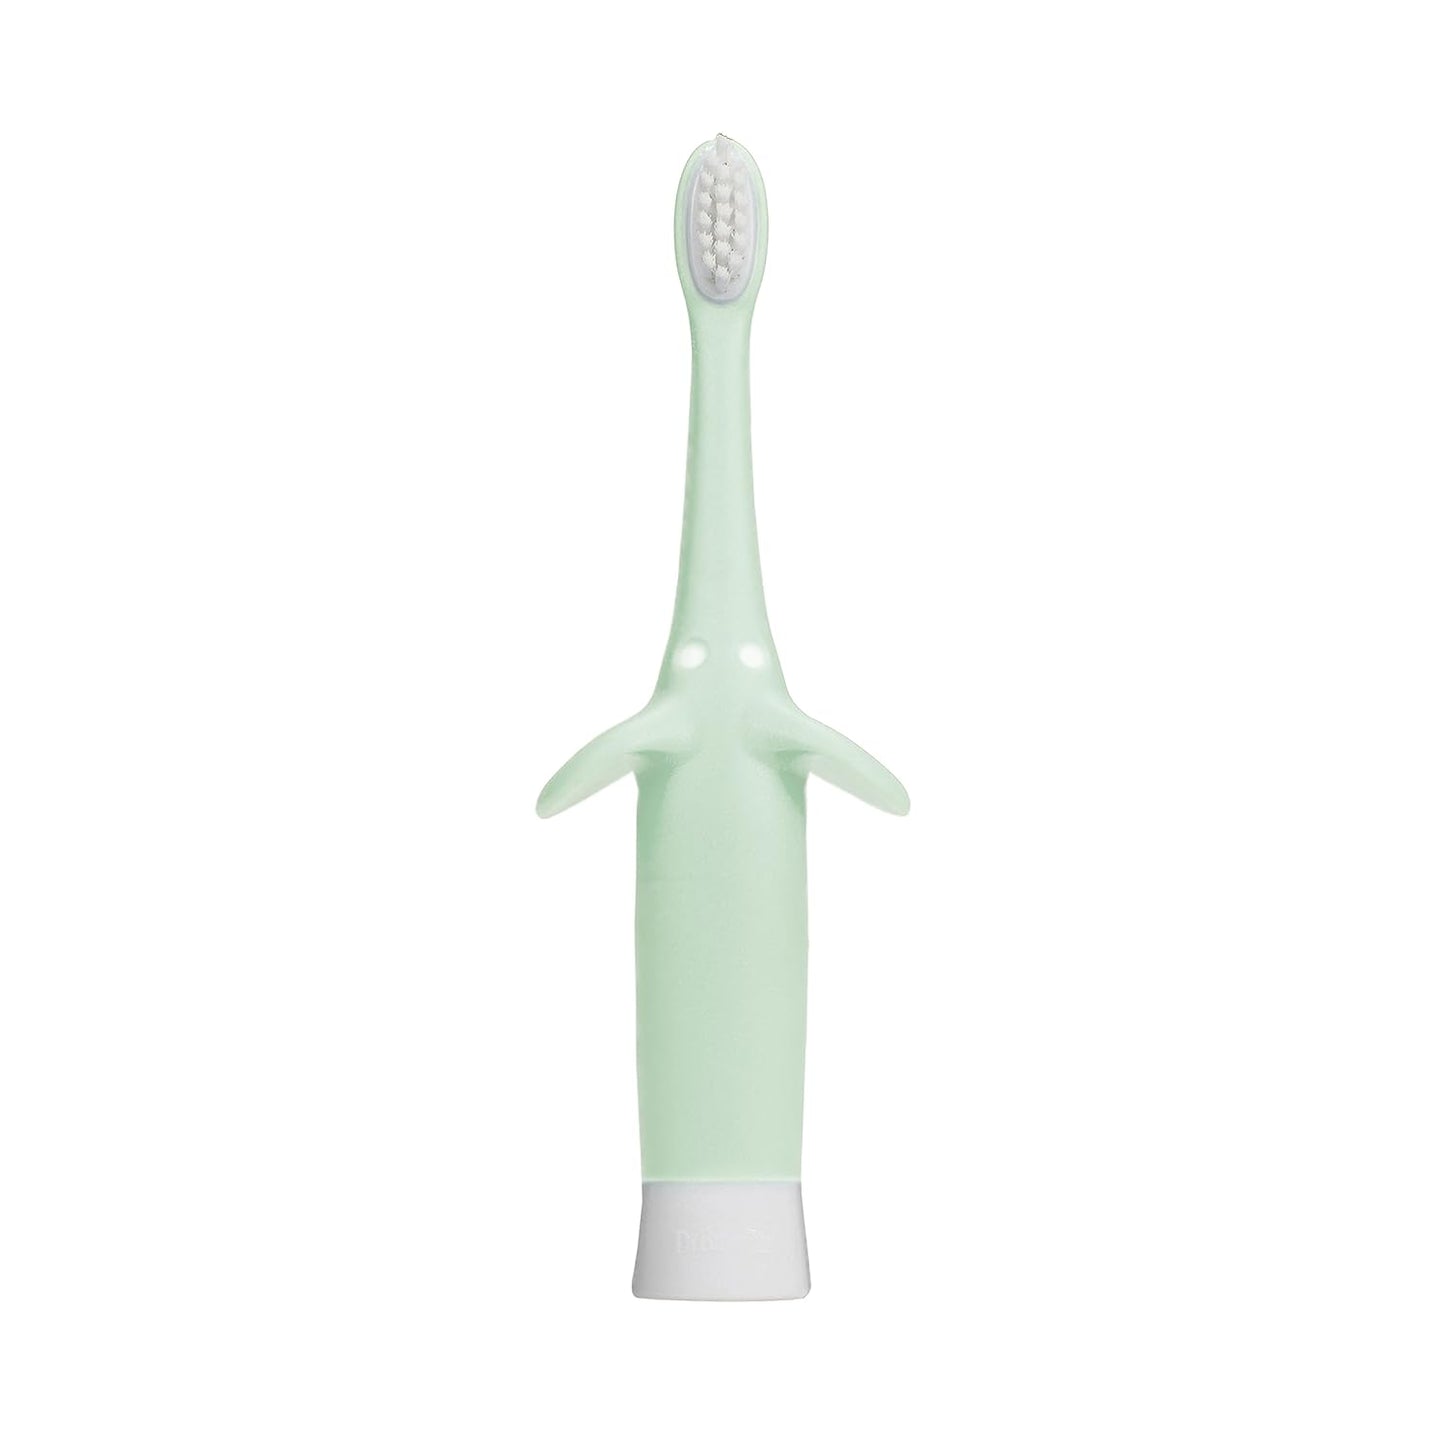 Dr. Brown's Infant-to-Toddler Training Toothbrush, Soft for Baby's First Teeth, Giraffe, 0-3 Years